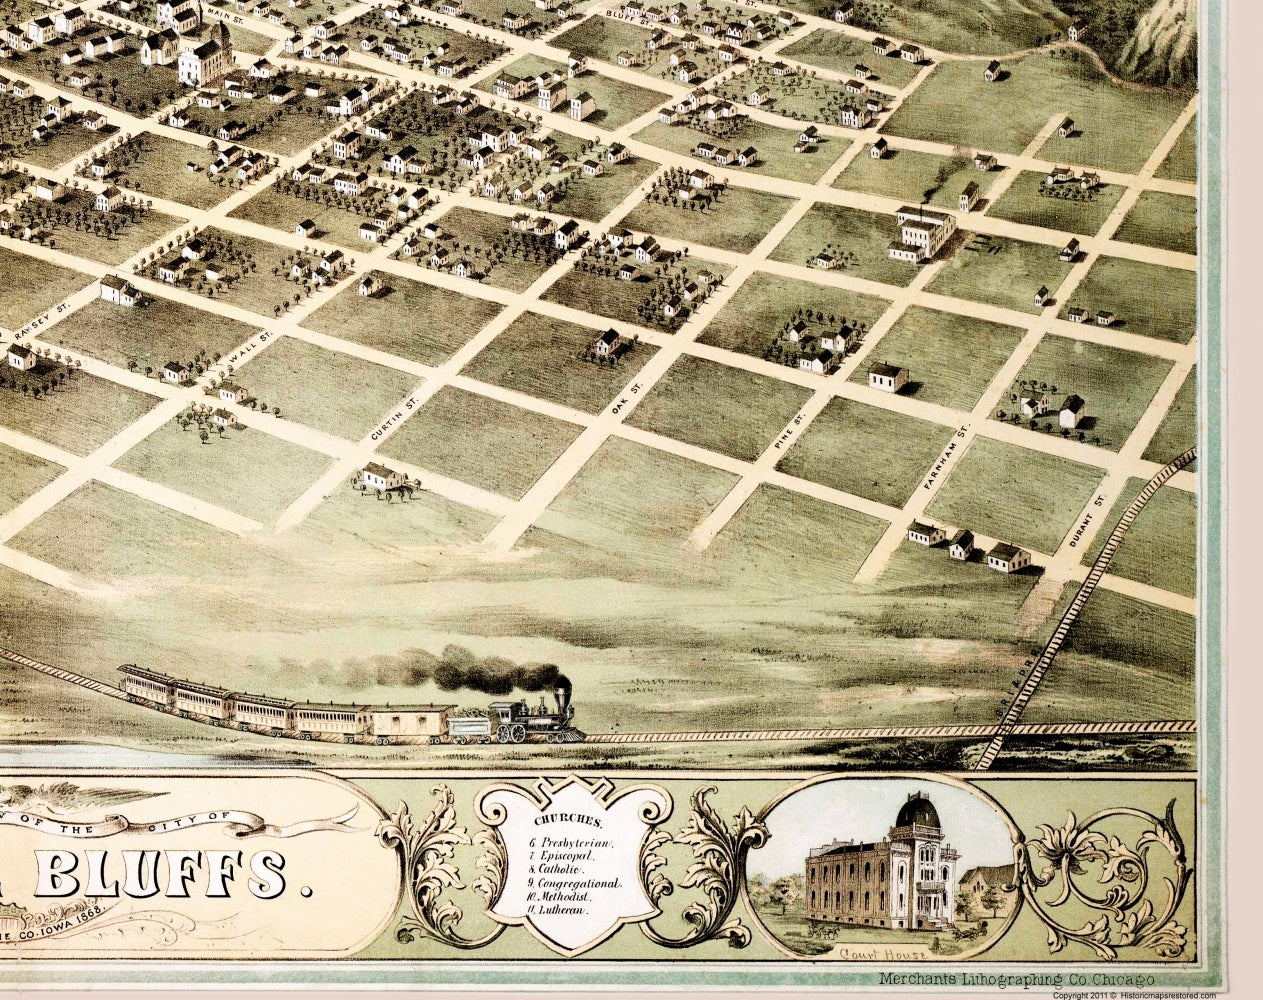 Historic Panoramic View - Council Bluffs Iowa - Ruger 1868 - 23 x 29.05 - Vintage Wall Art